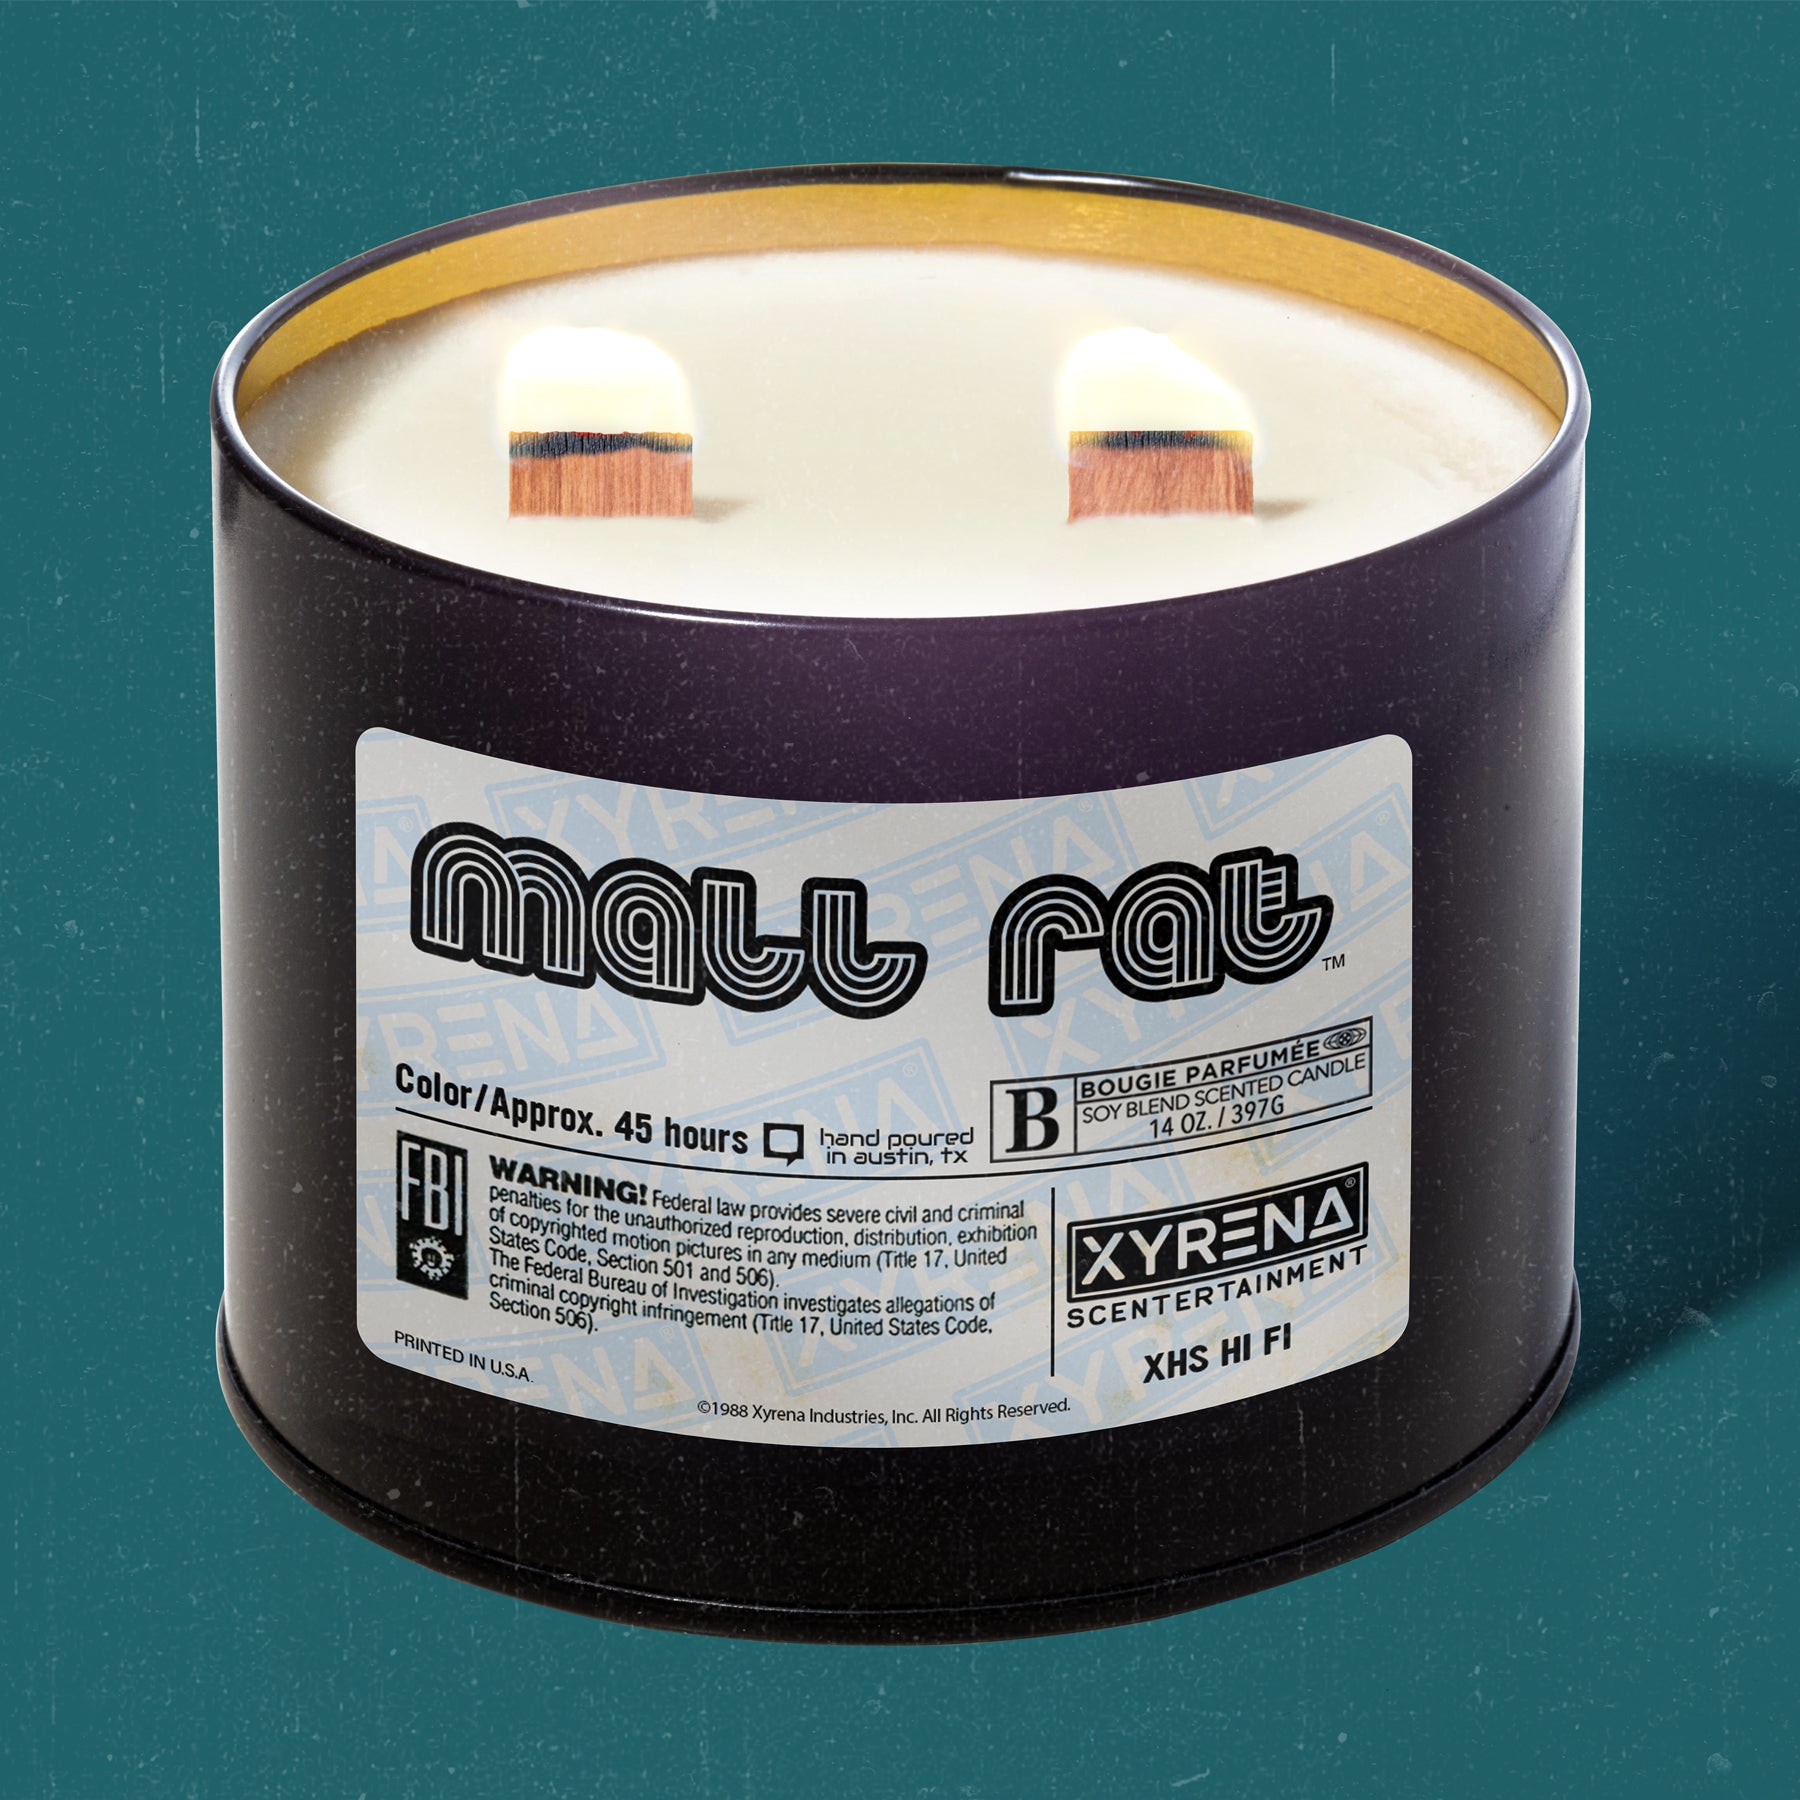 Mall Rat™ - 14 oz Candle